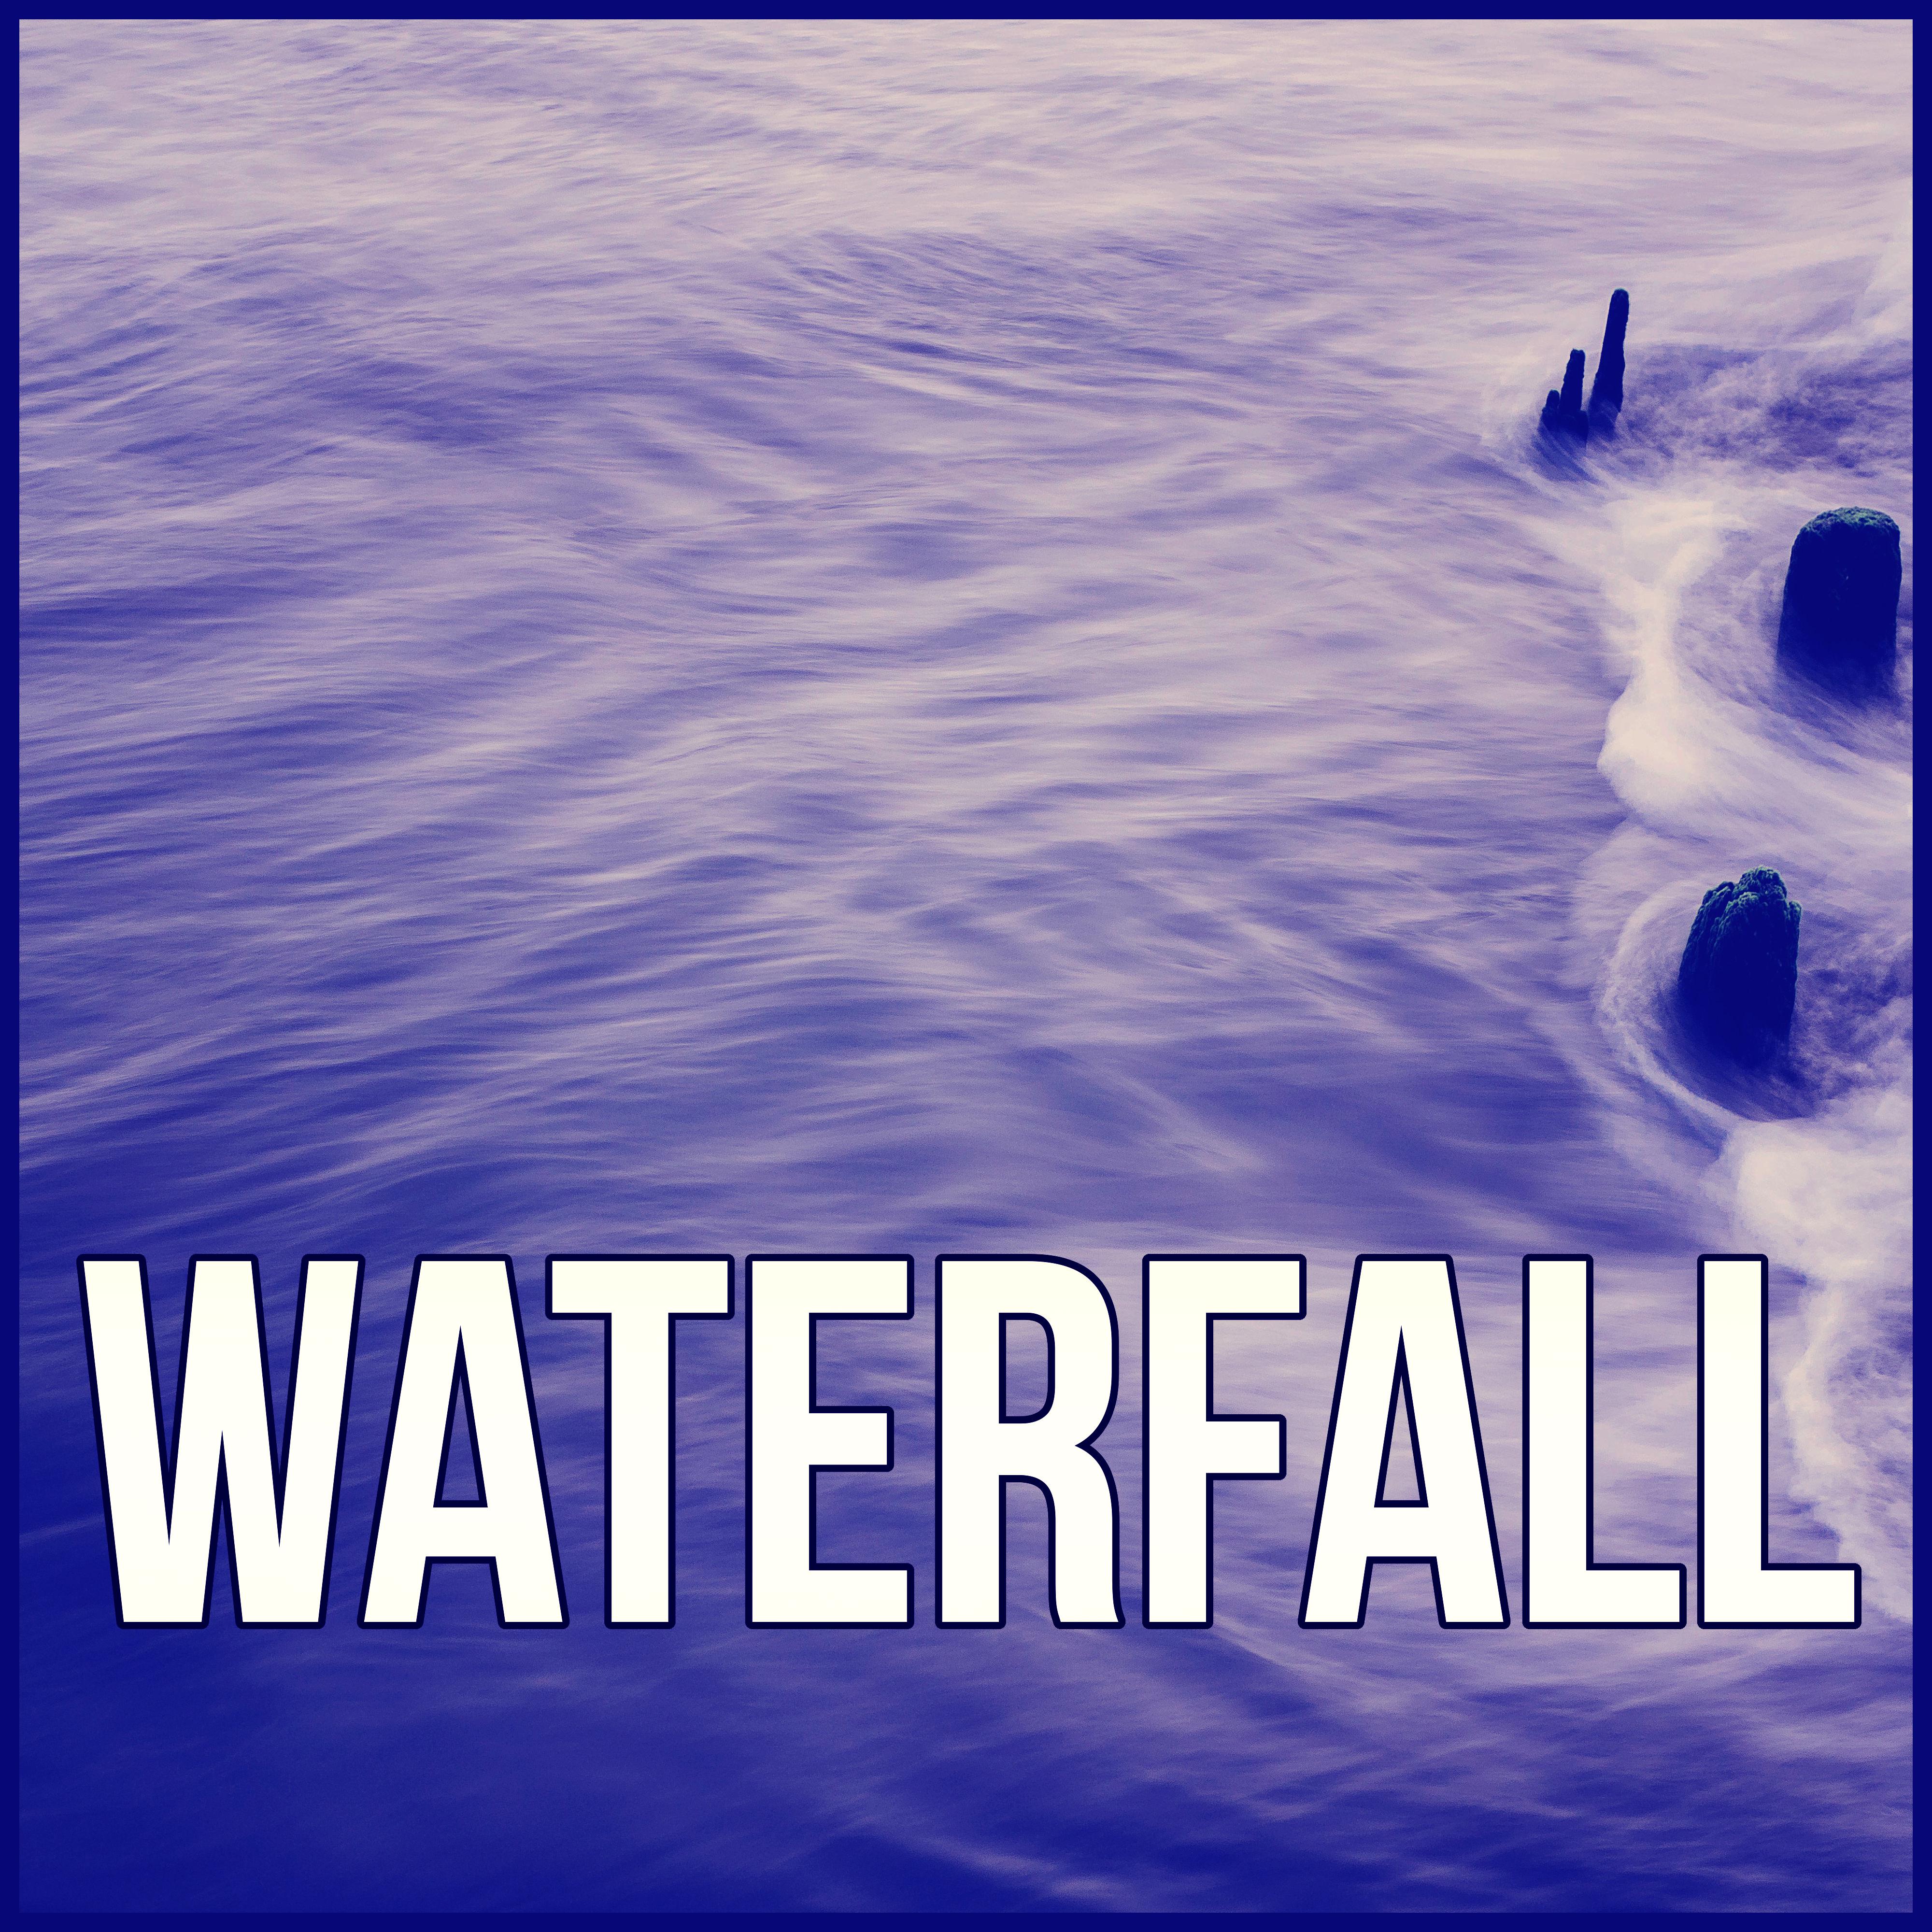 Waterfall - New Age Music for Training and Meditation, Background Music for Massage Therapy, Soothing Spa